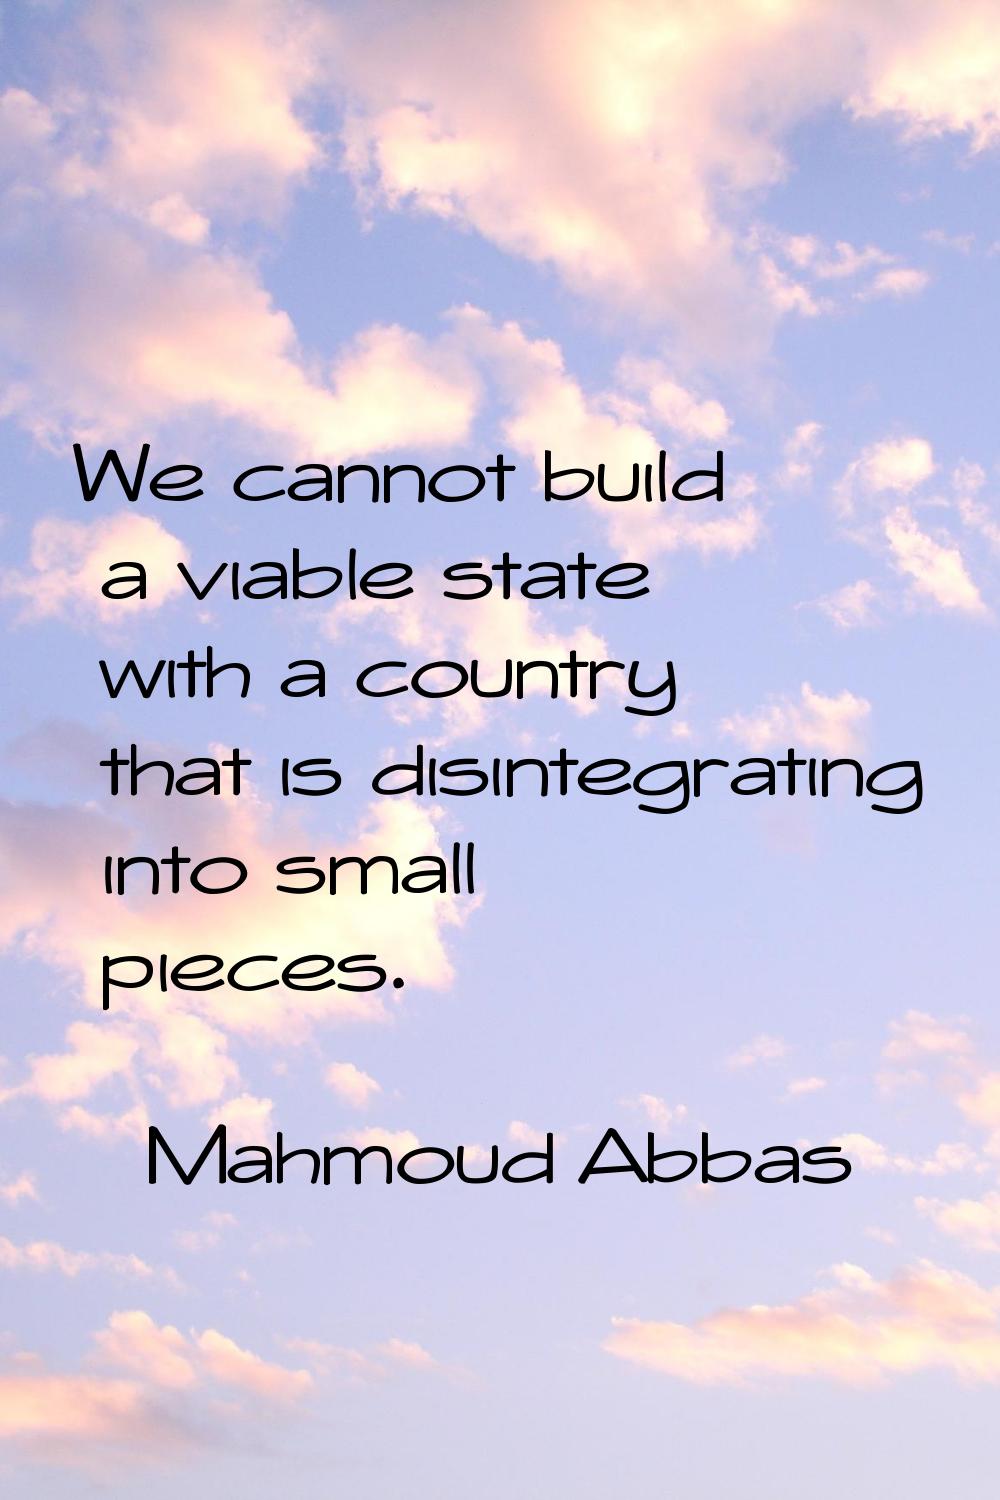 We cannot build a viable state with a country that is disintegrating into small pieces.